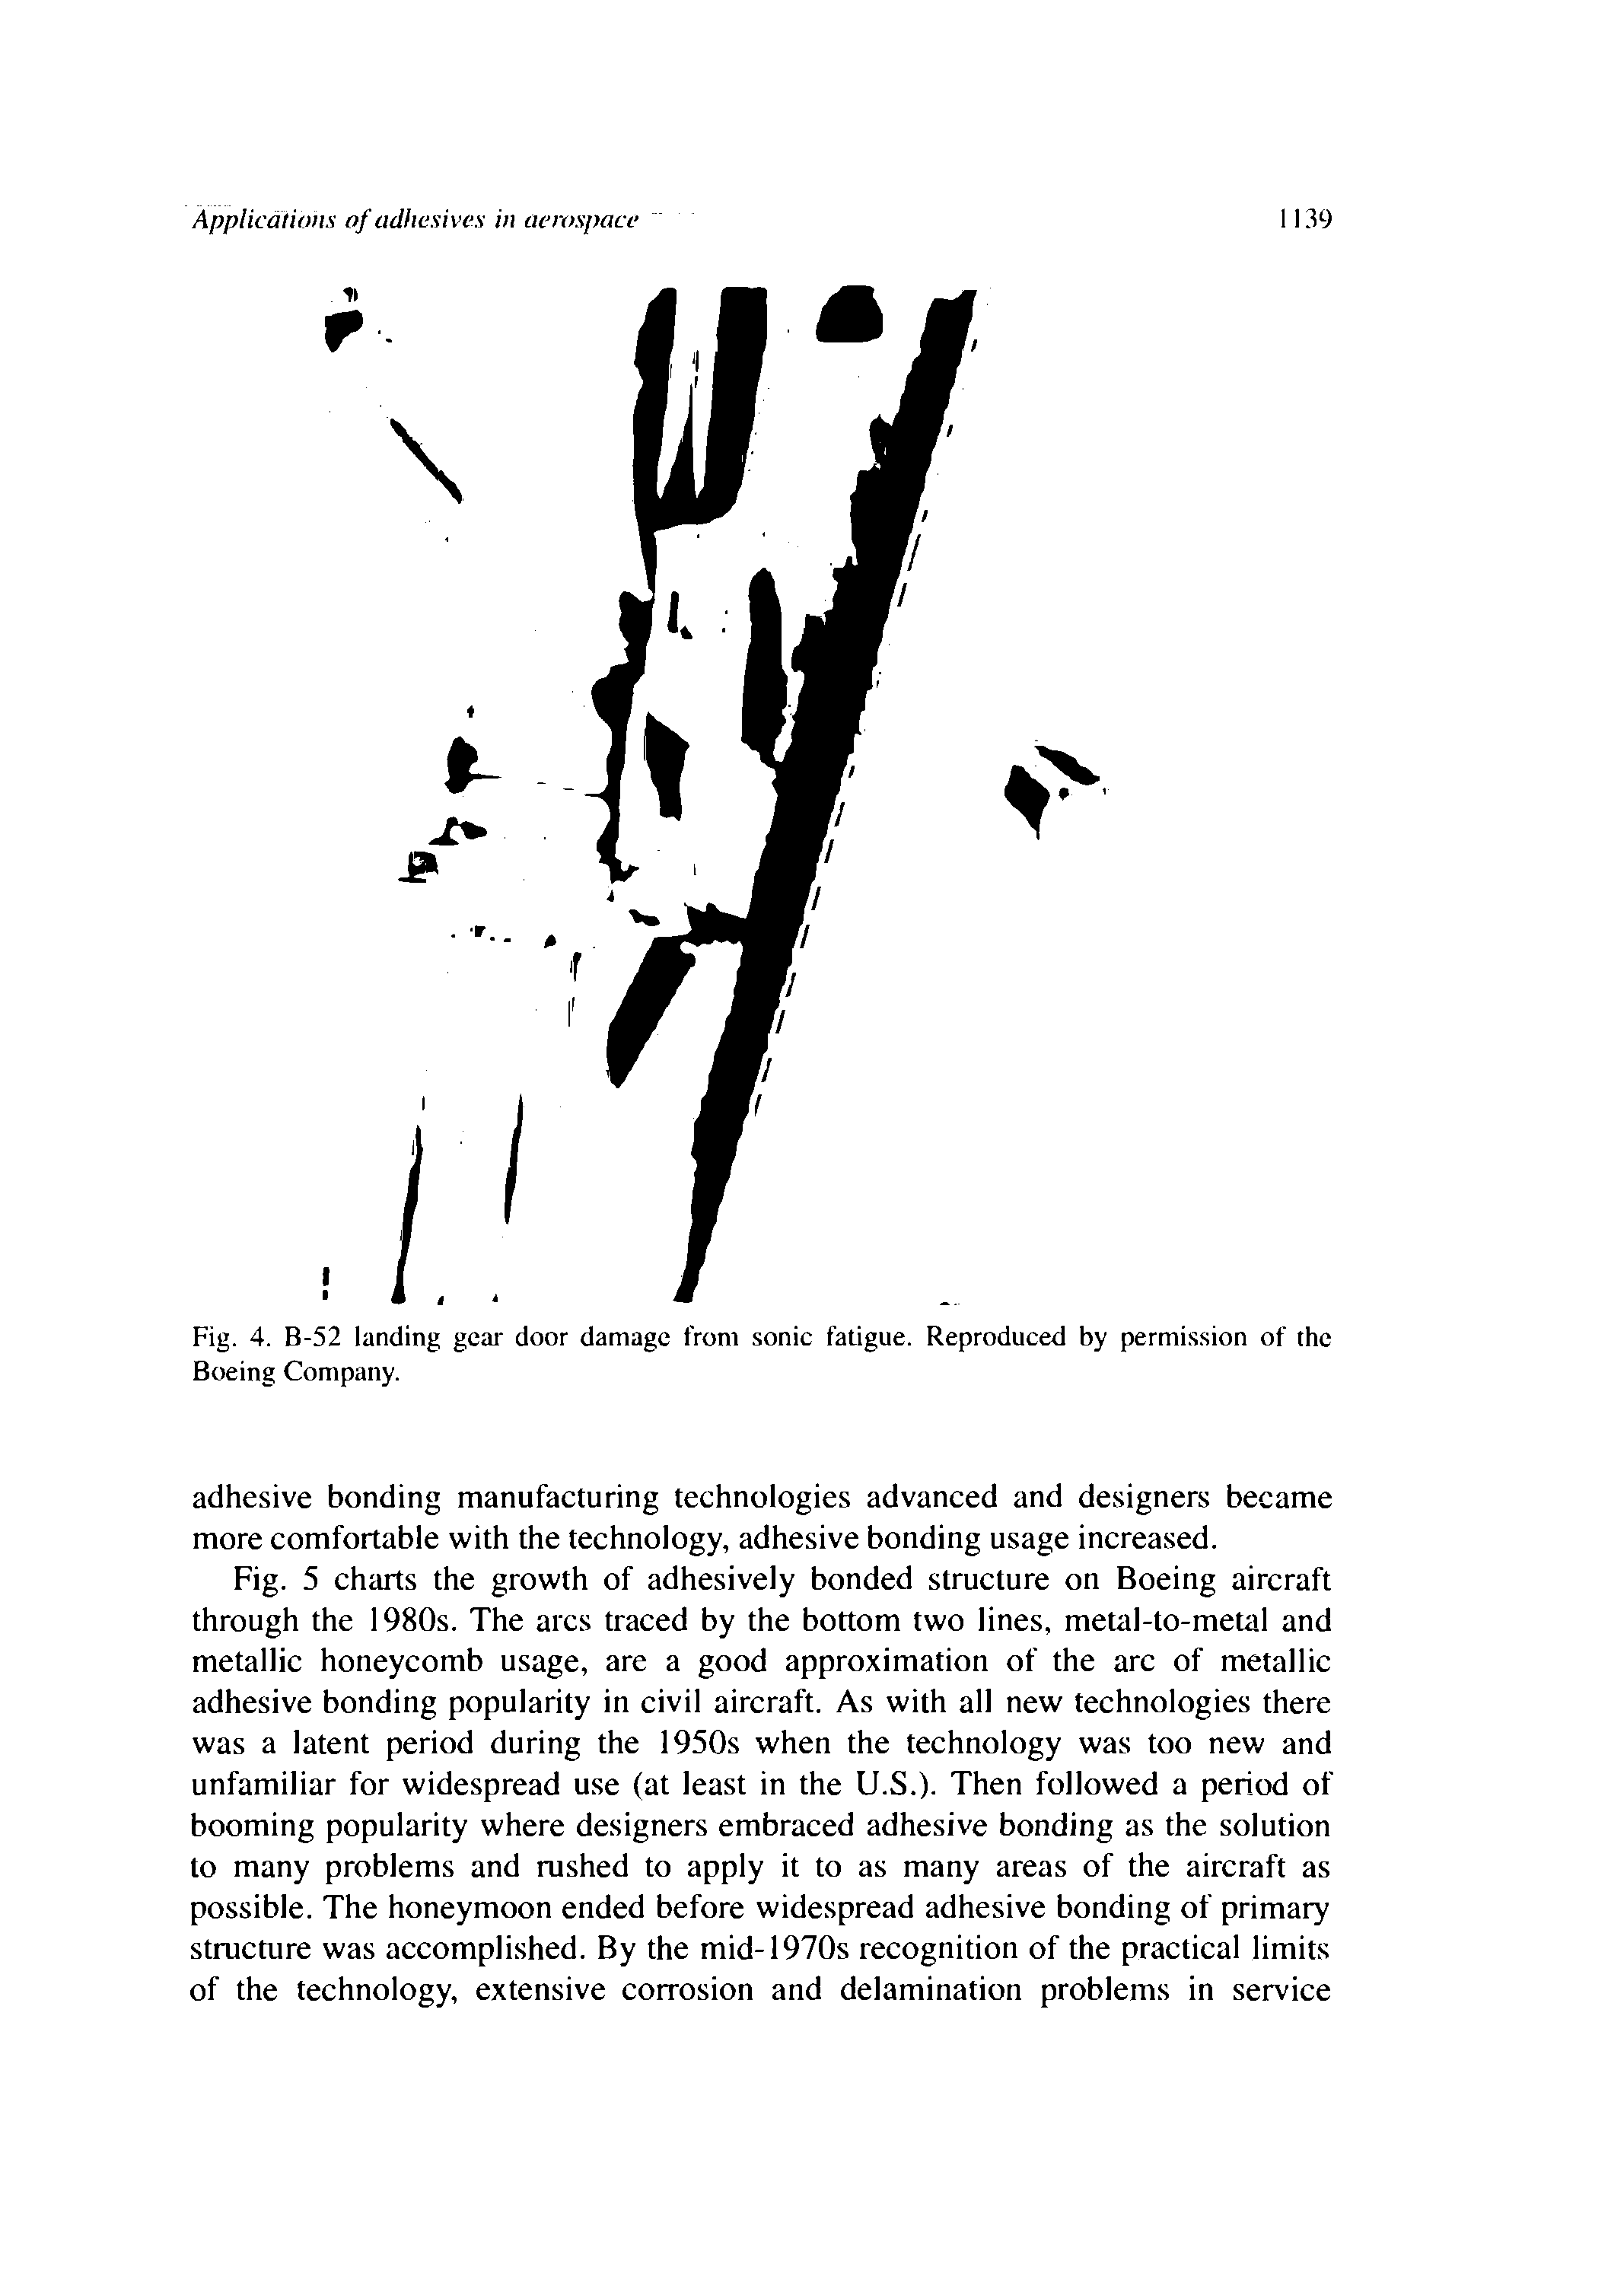 Fig. 4. B-52 landing gcai" door damage from sonic fatigue. Reproduced by permission of the Boeing Company.